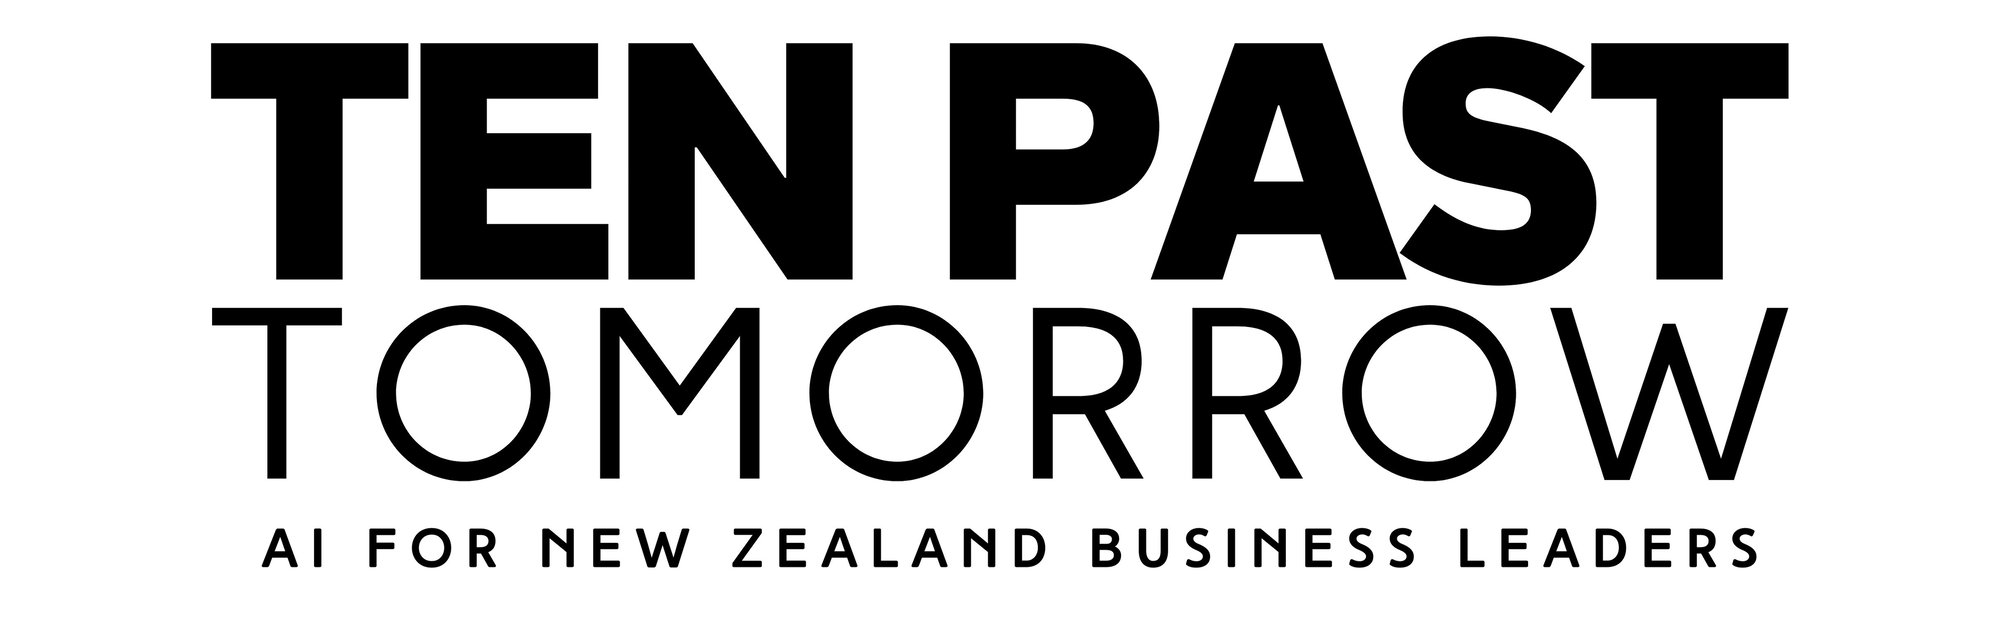 AI For New Zealand Business Leaders